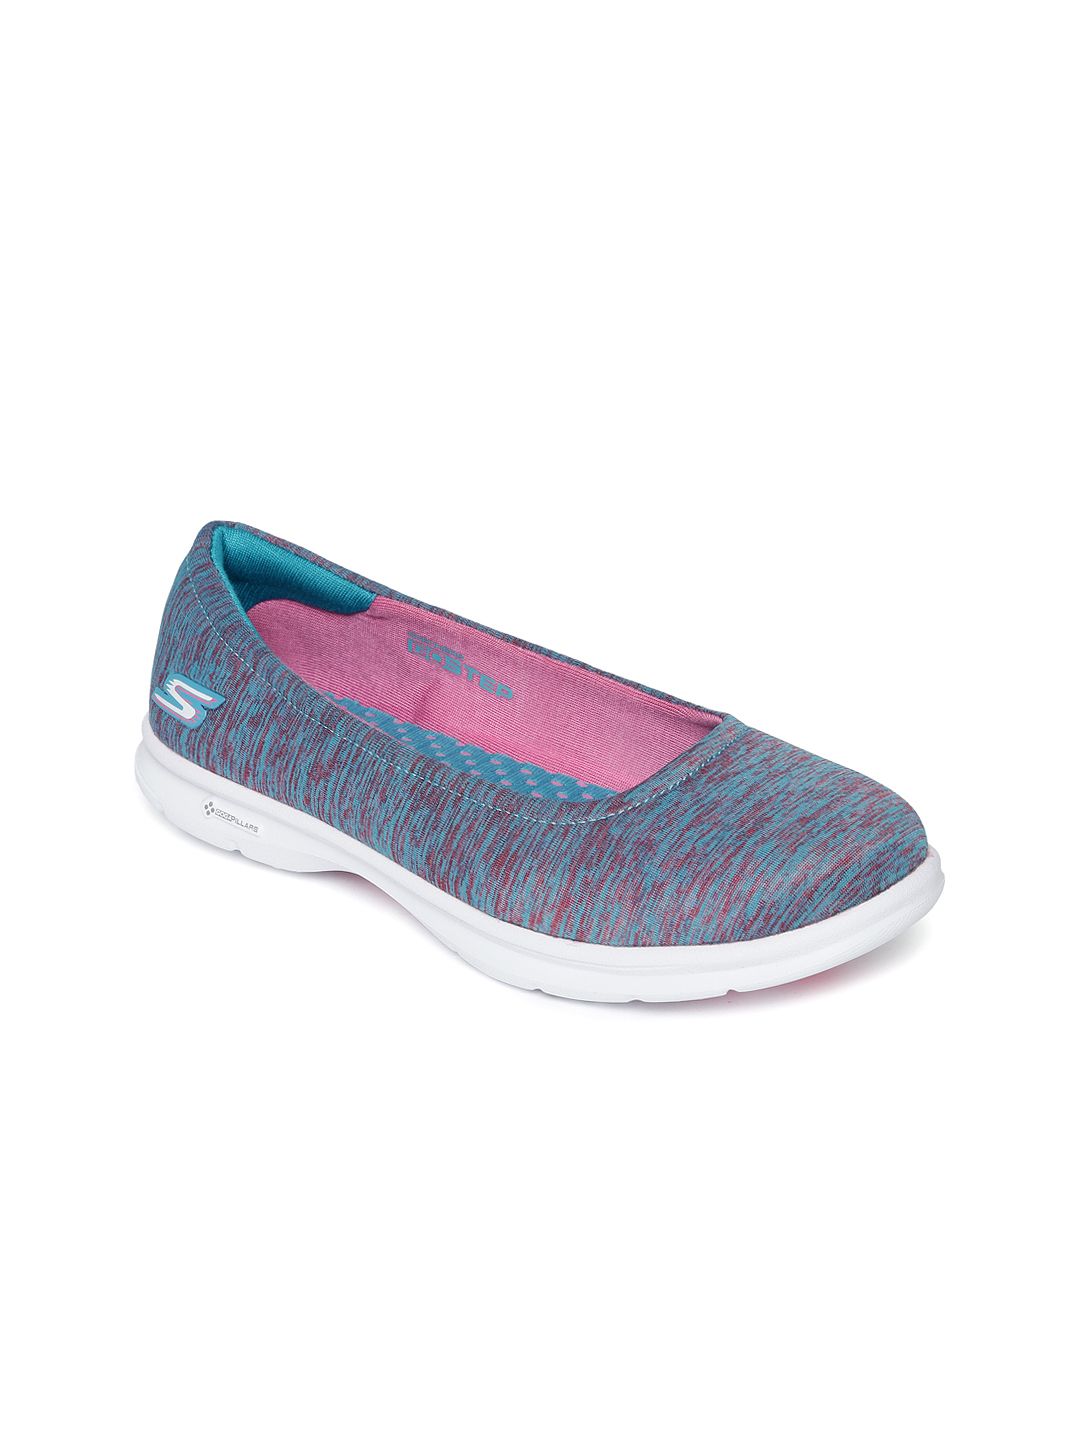 shoes skechers india